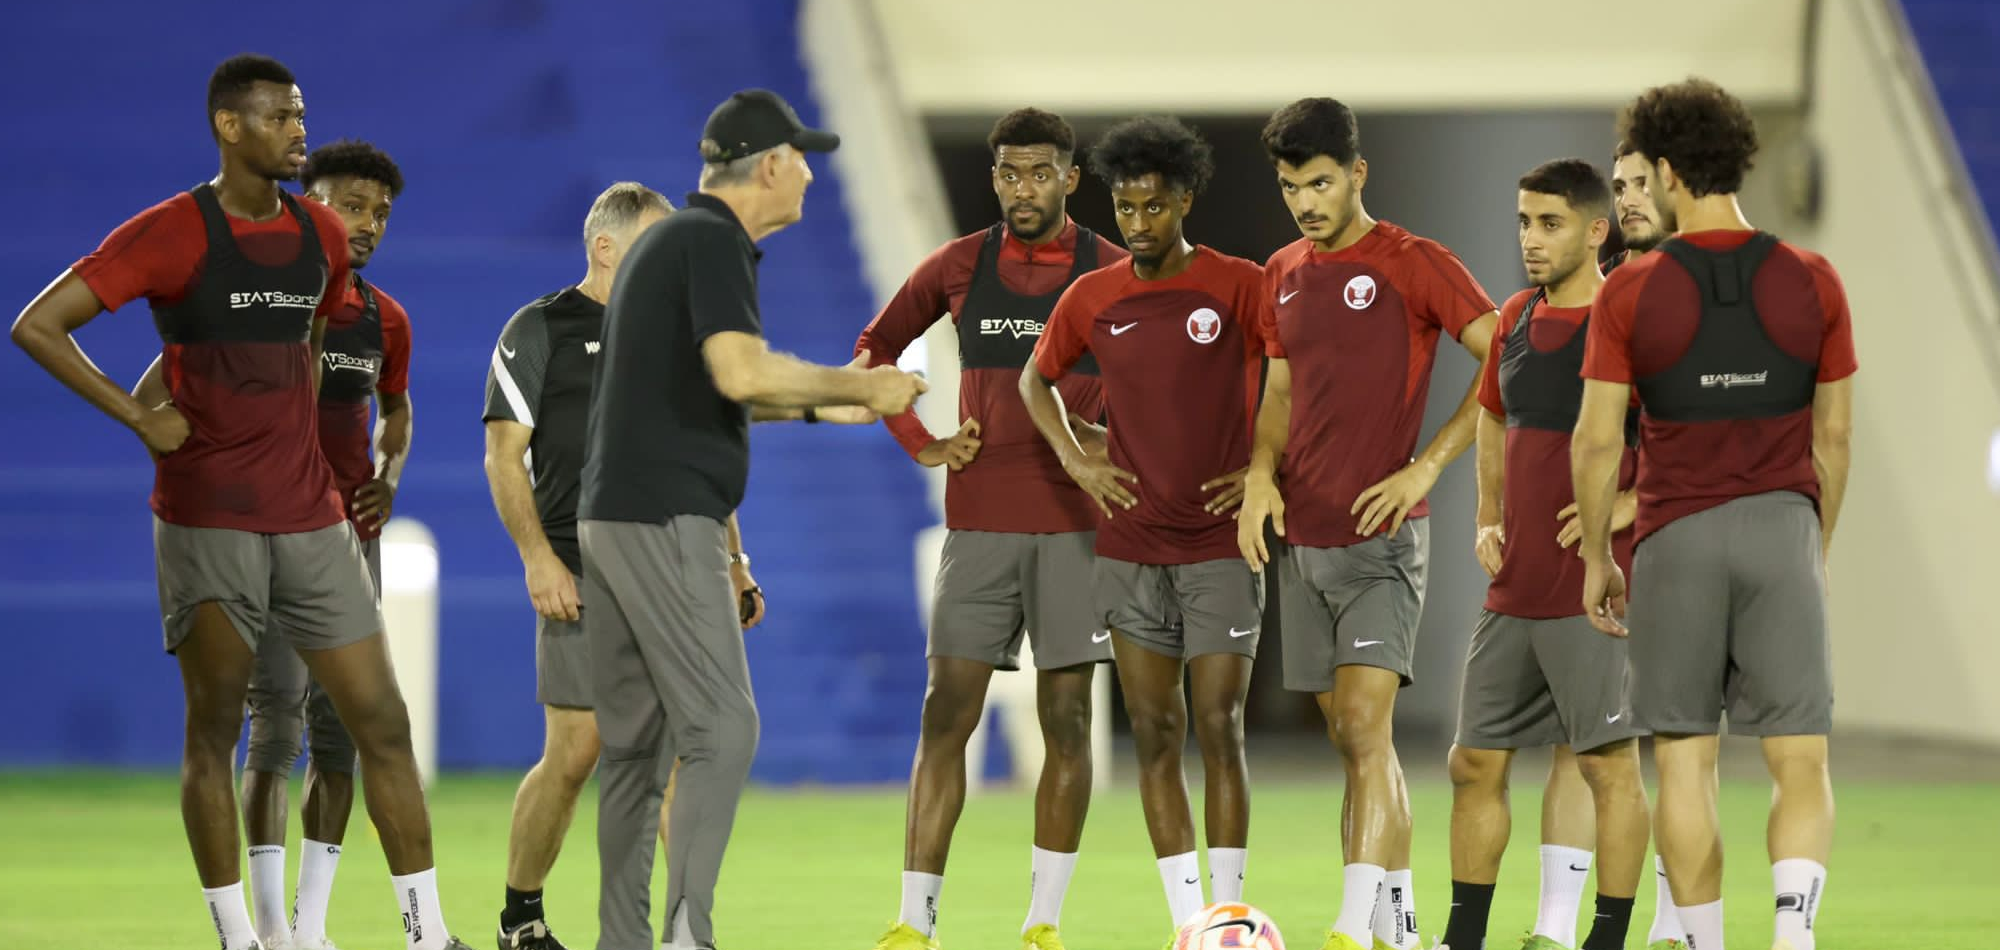 Qatar Football Team Starts Preparations for CONCACAF Gold Cup 2023 in Doha Ahead of Austria Camp